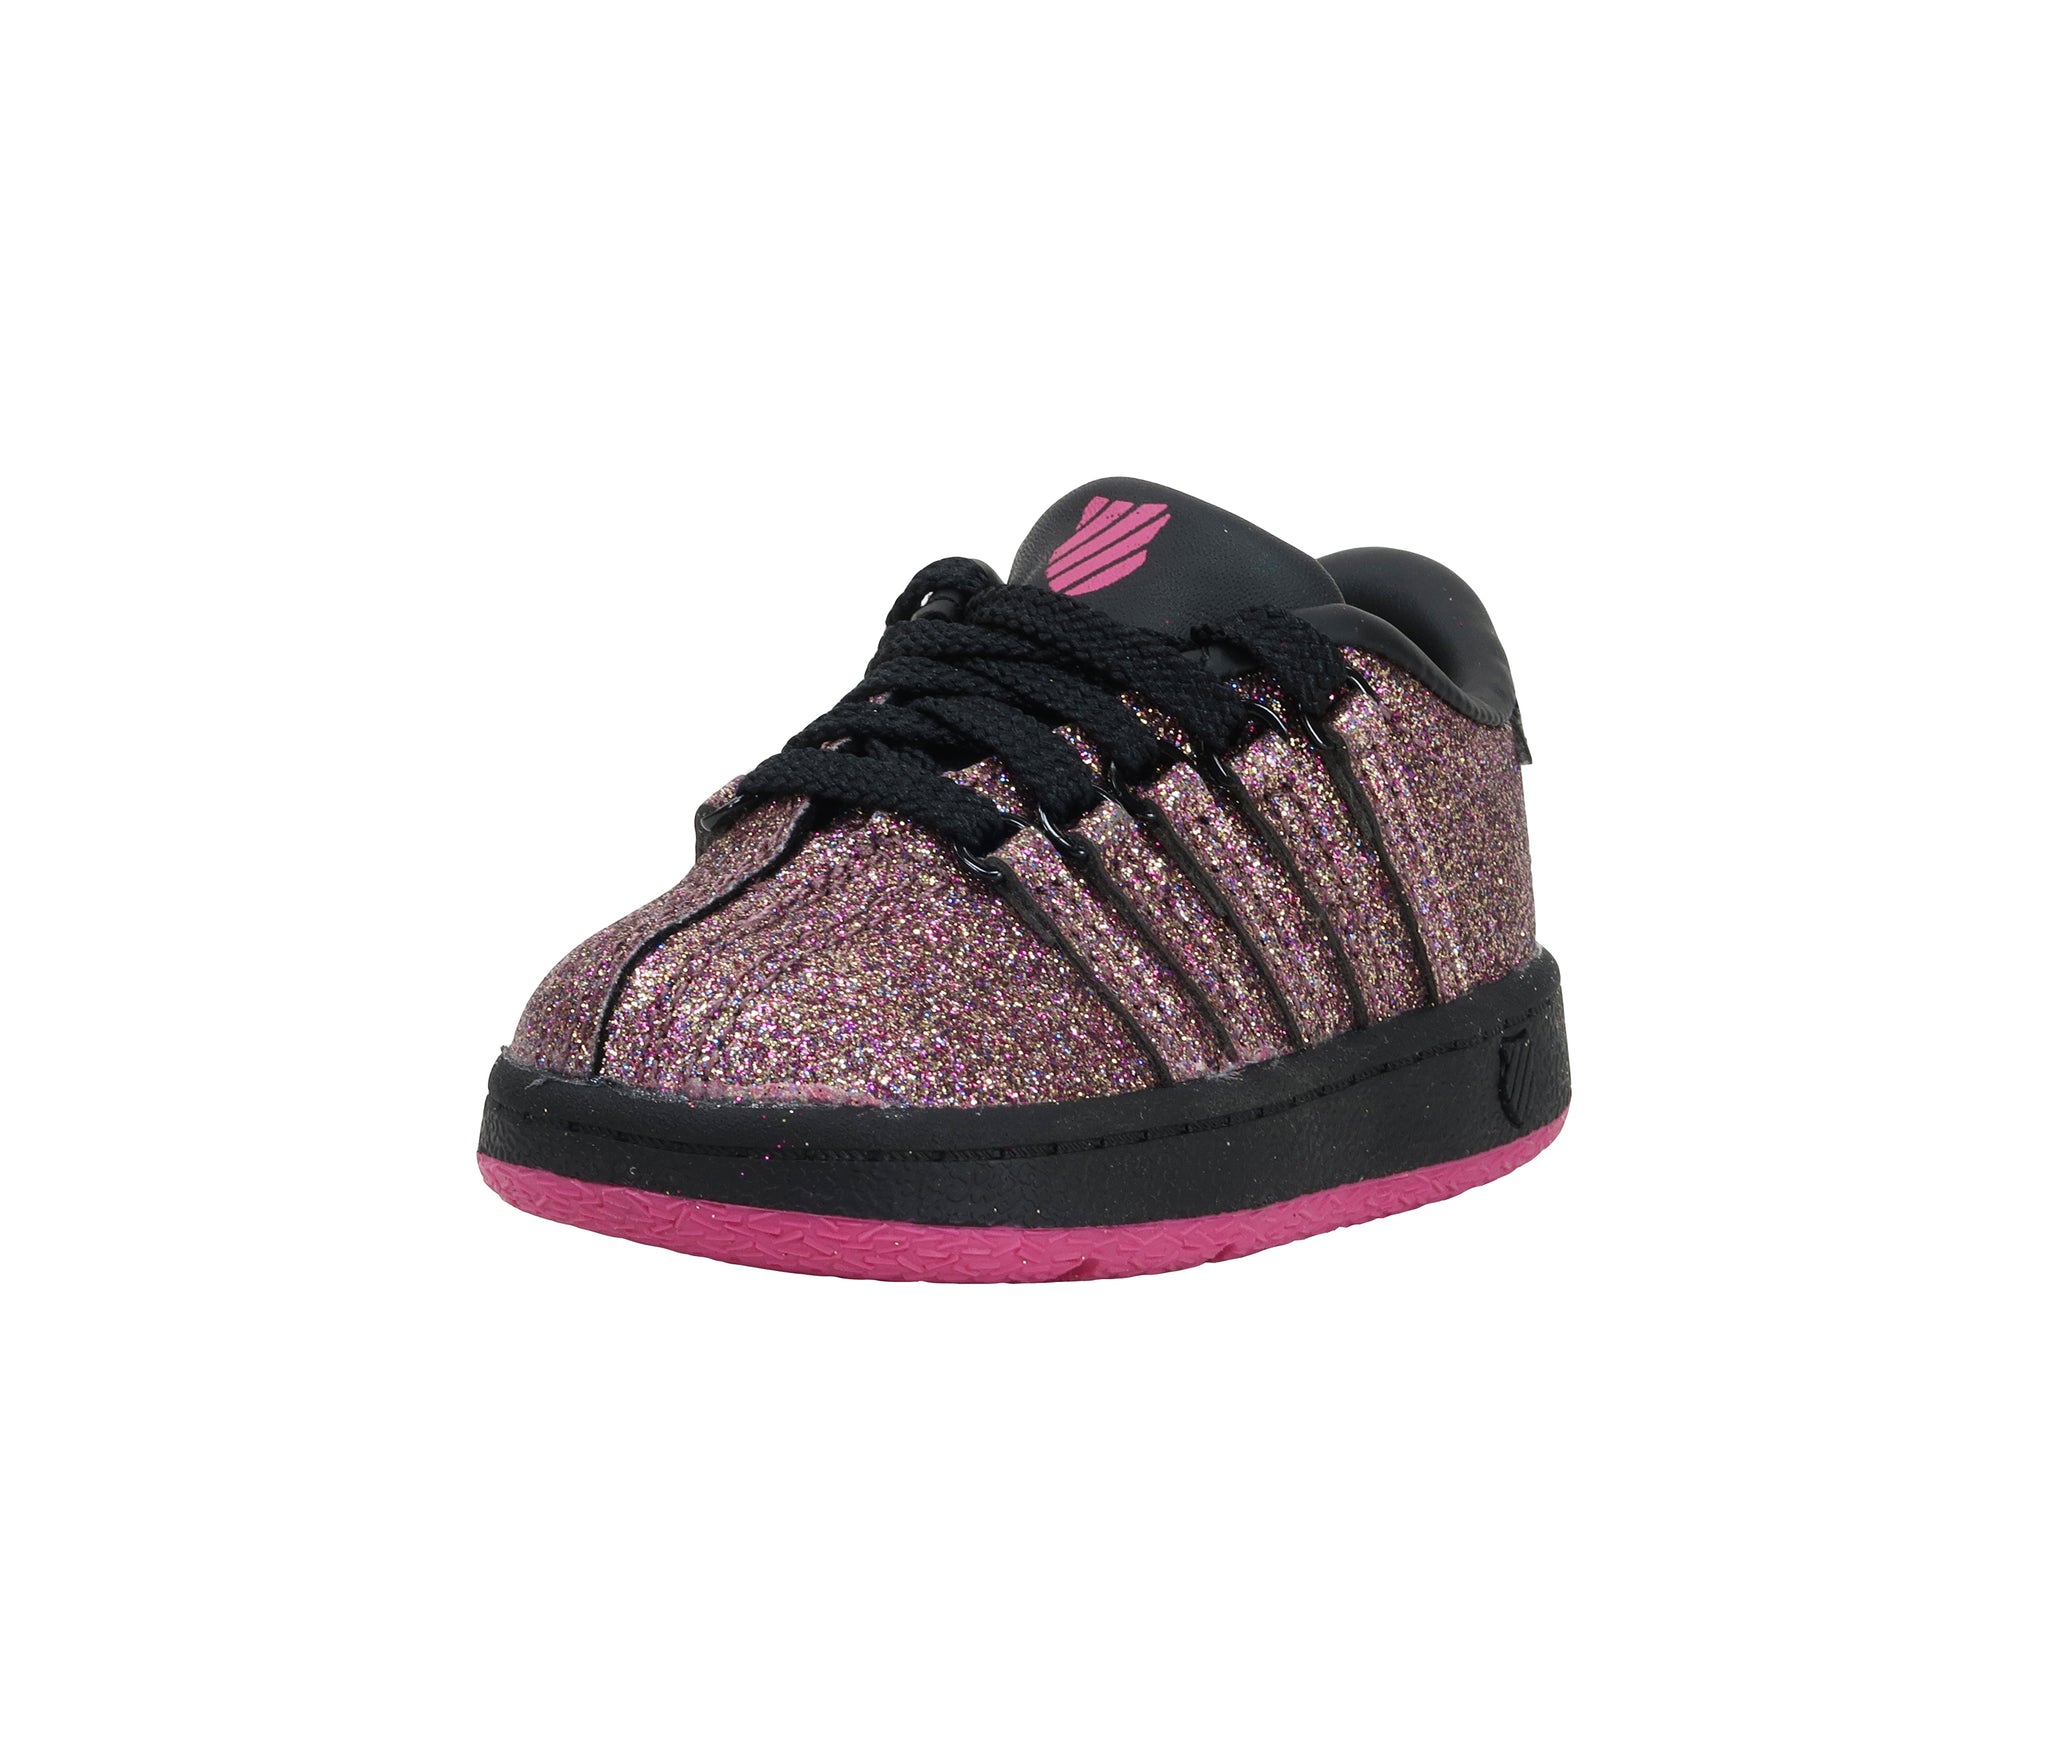 K-Swiss Toddler Classic VN Black/Sparkle Shoes